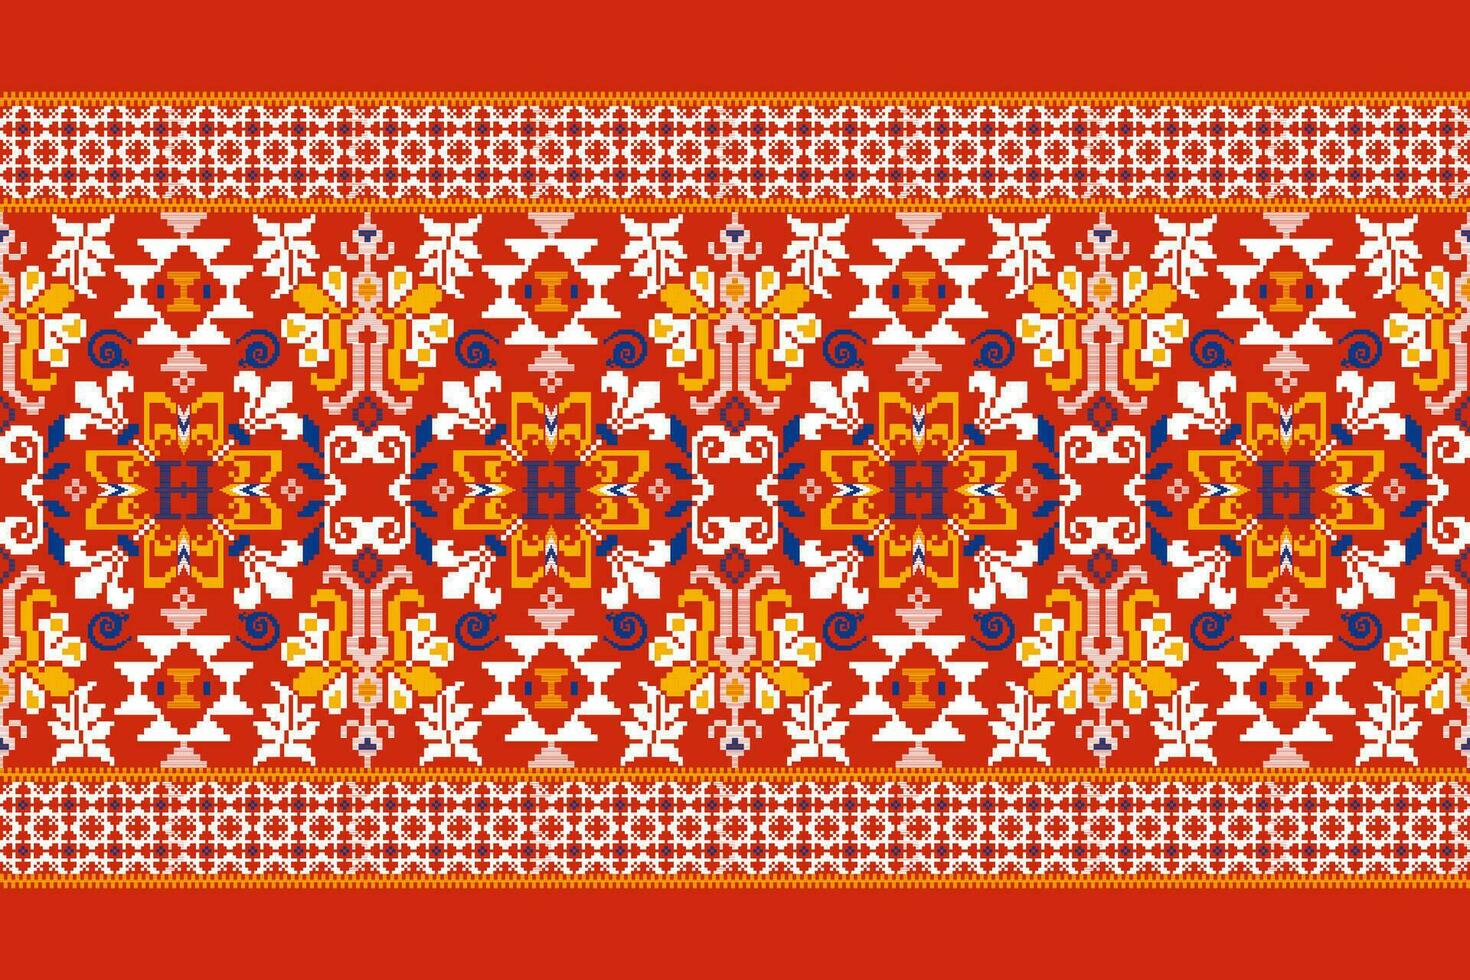 Floral Cross Stitch Embroidery on white background.geometric ethnic oriental pattern traditional.Aztec style abstract vector illustration.design for texture,fabric,clothing,wrapping,decoration,scarf.